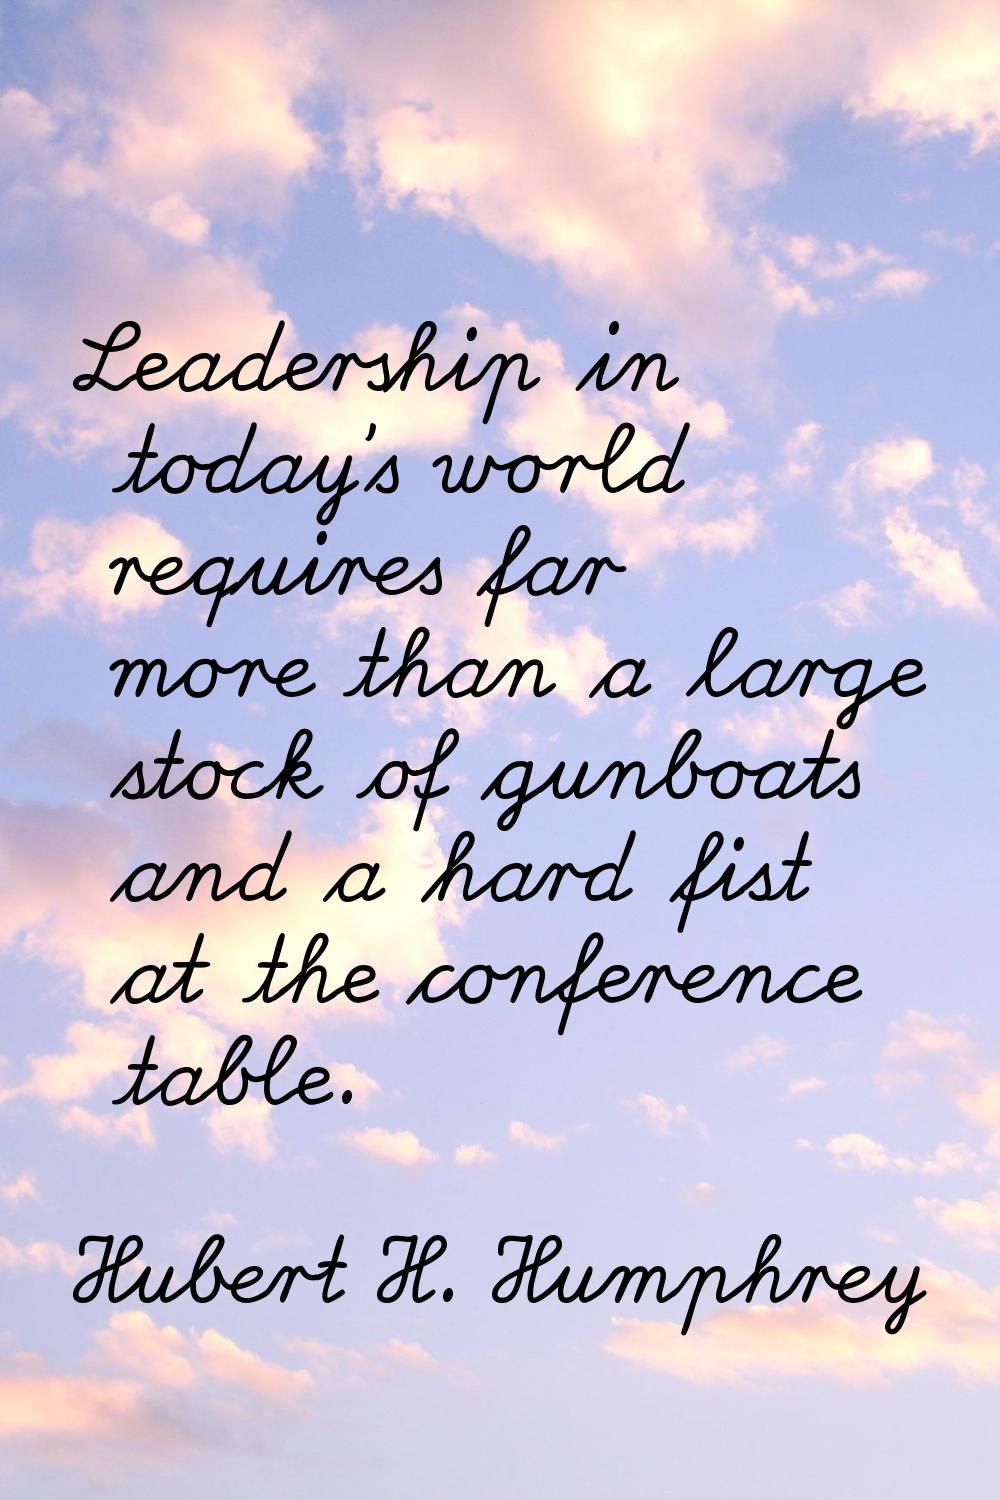 Leadership in today's world requires far more than a large stock of gunboats and a hard fist at the